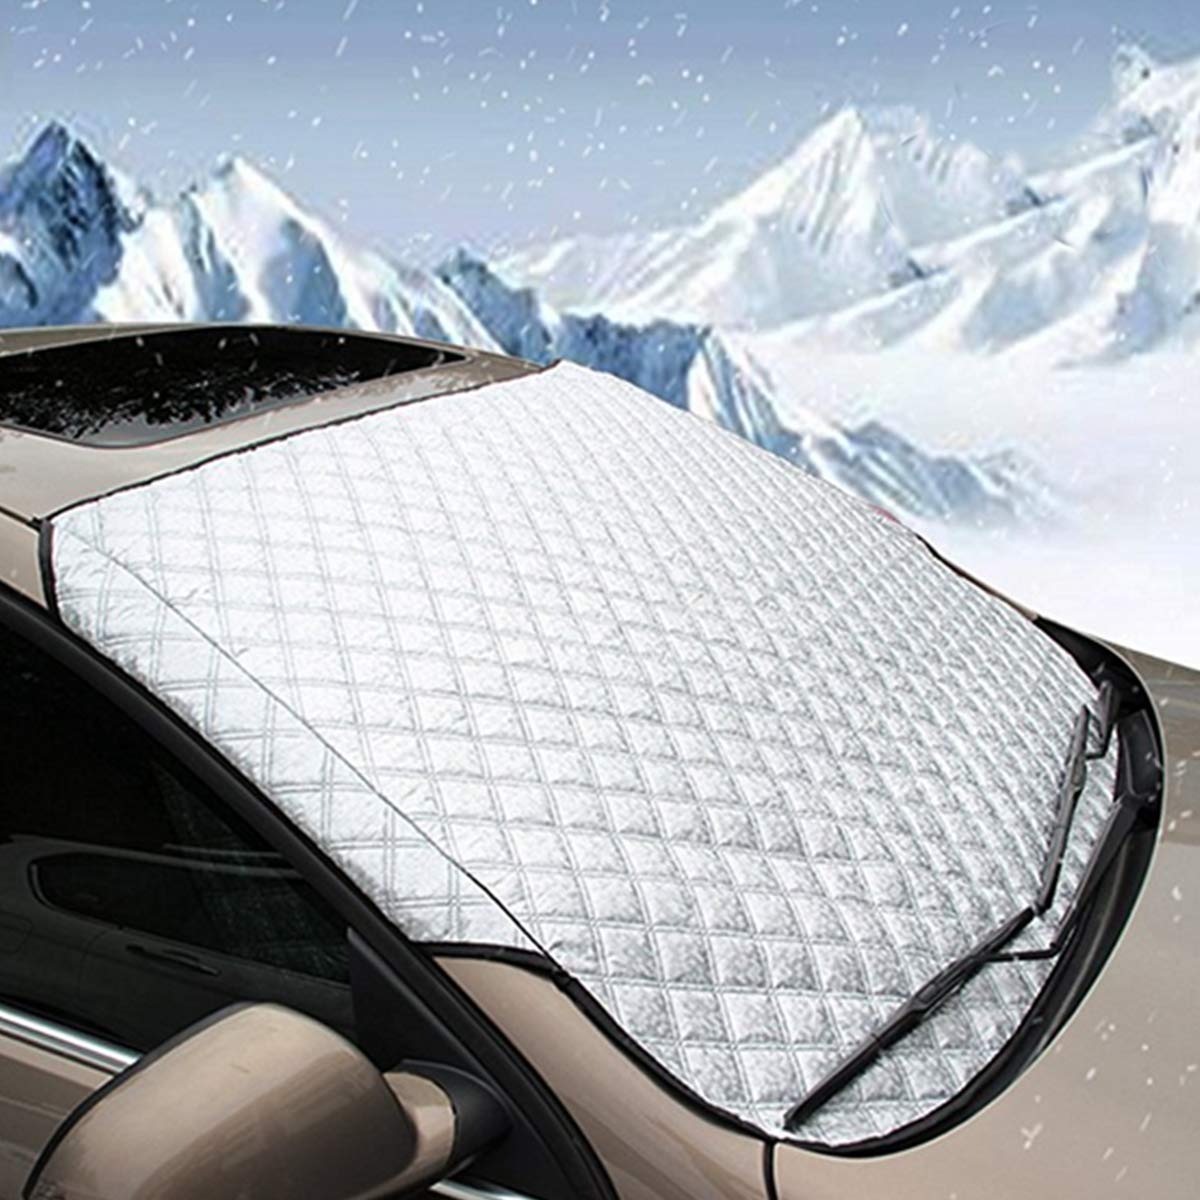 Hail Mary Protective Windshield Cover